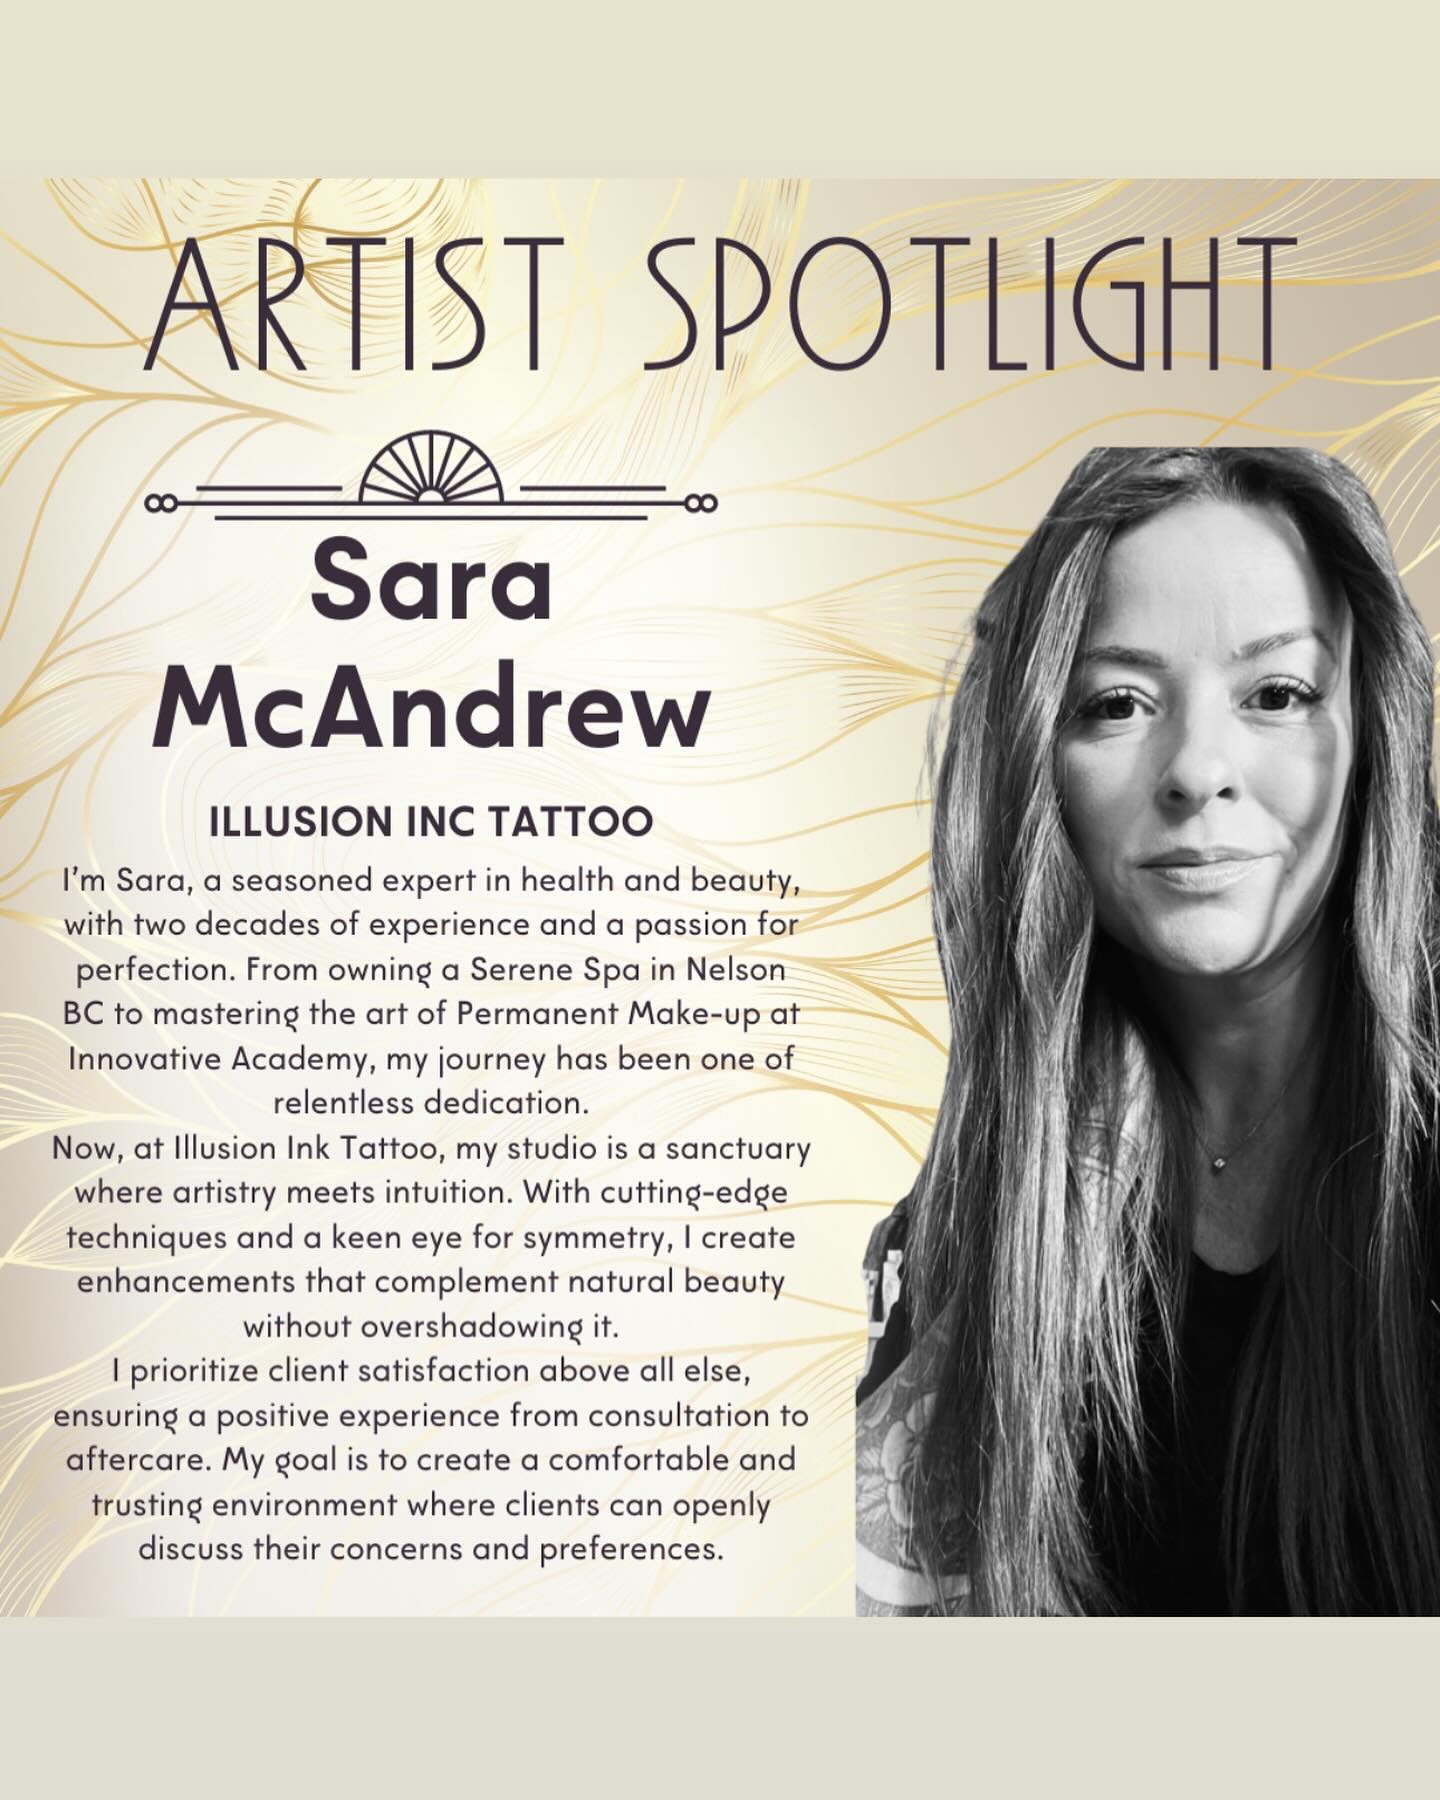 Featuring our newest member Sara with Illusion Ink !! An absolute gem of a PMU Artist !!! 

✨Lip Blush Tattoo 

✨Lash Enhancement Tattoo

✨Powder Ombr&eacute; Brow Tattoo

✨Microneedeling 

✨Lift Saline Tattoo Removal 

✨9 years experience 

✨Booking